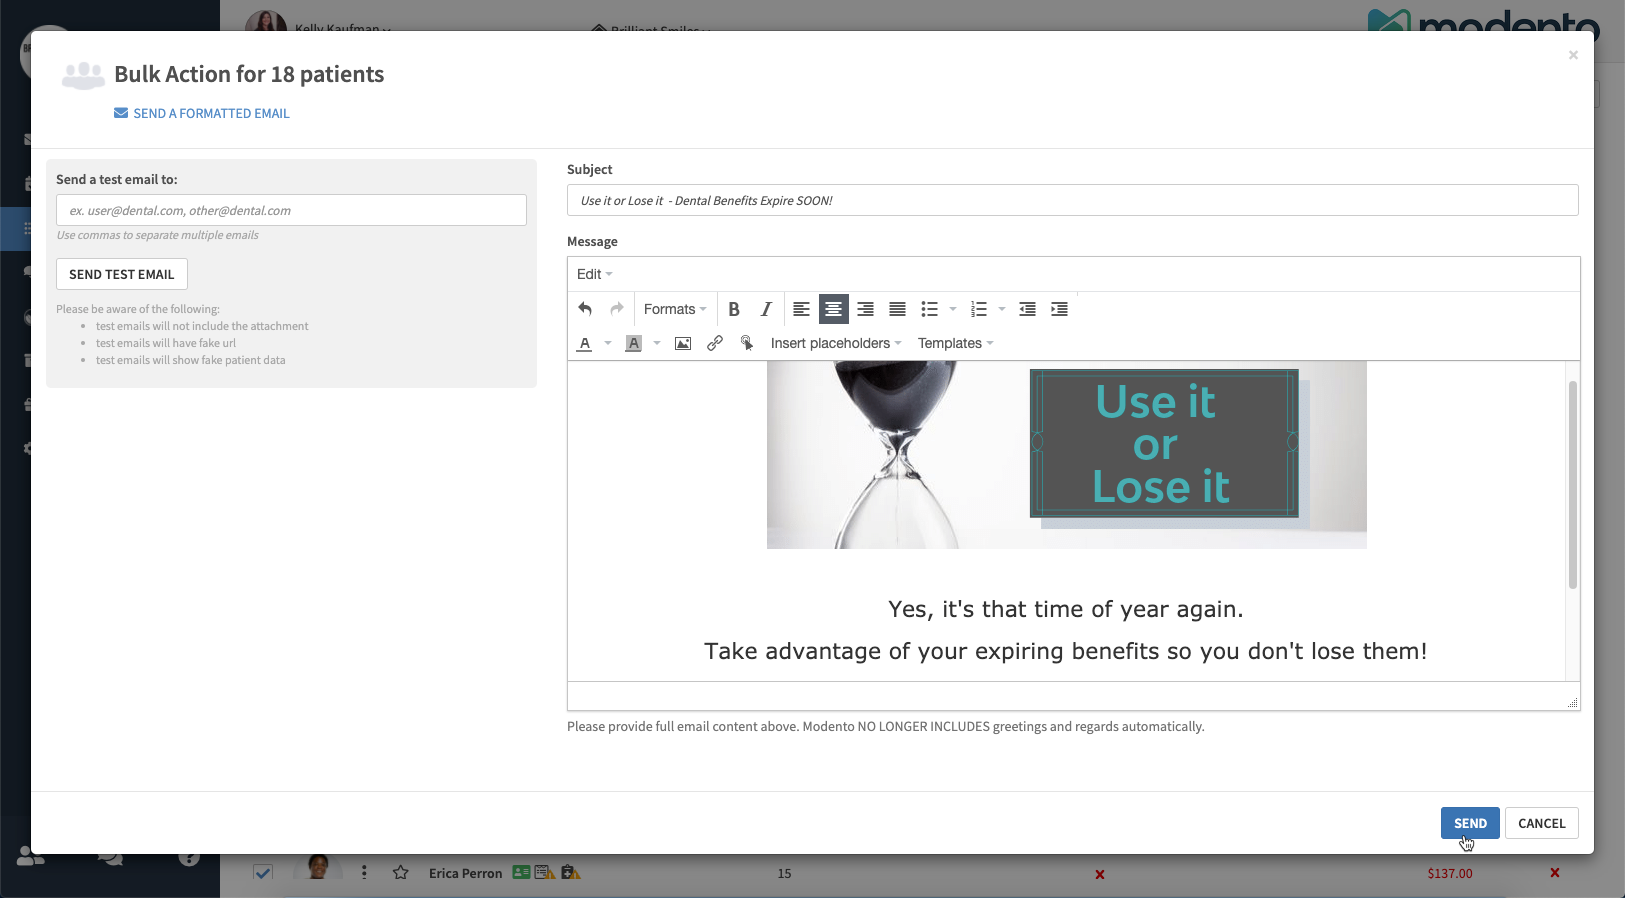 Modento email editor displaying a "use it or lose it" benefits reminder email for unscheduled patients